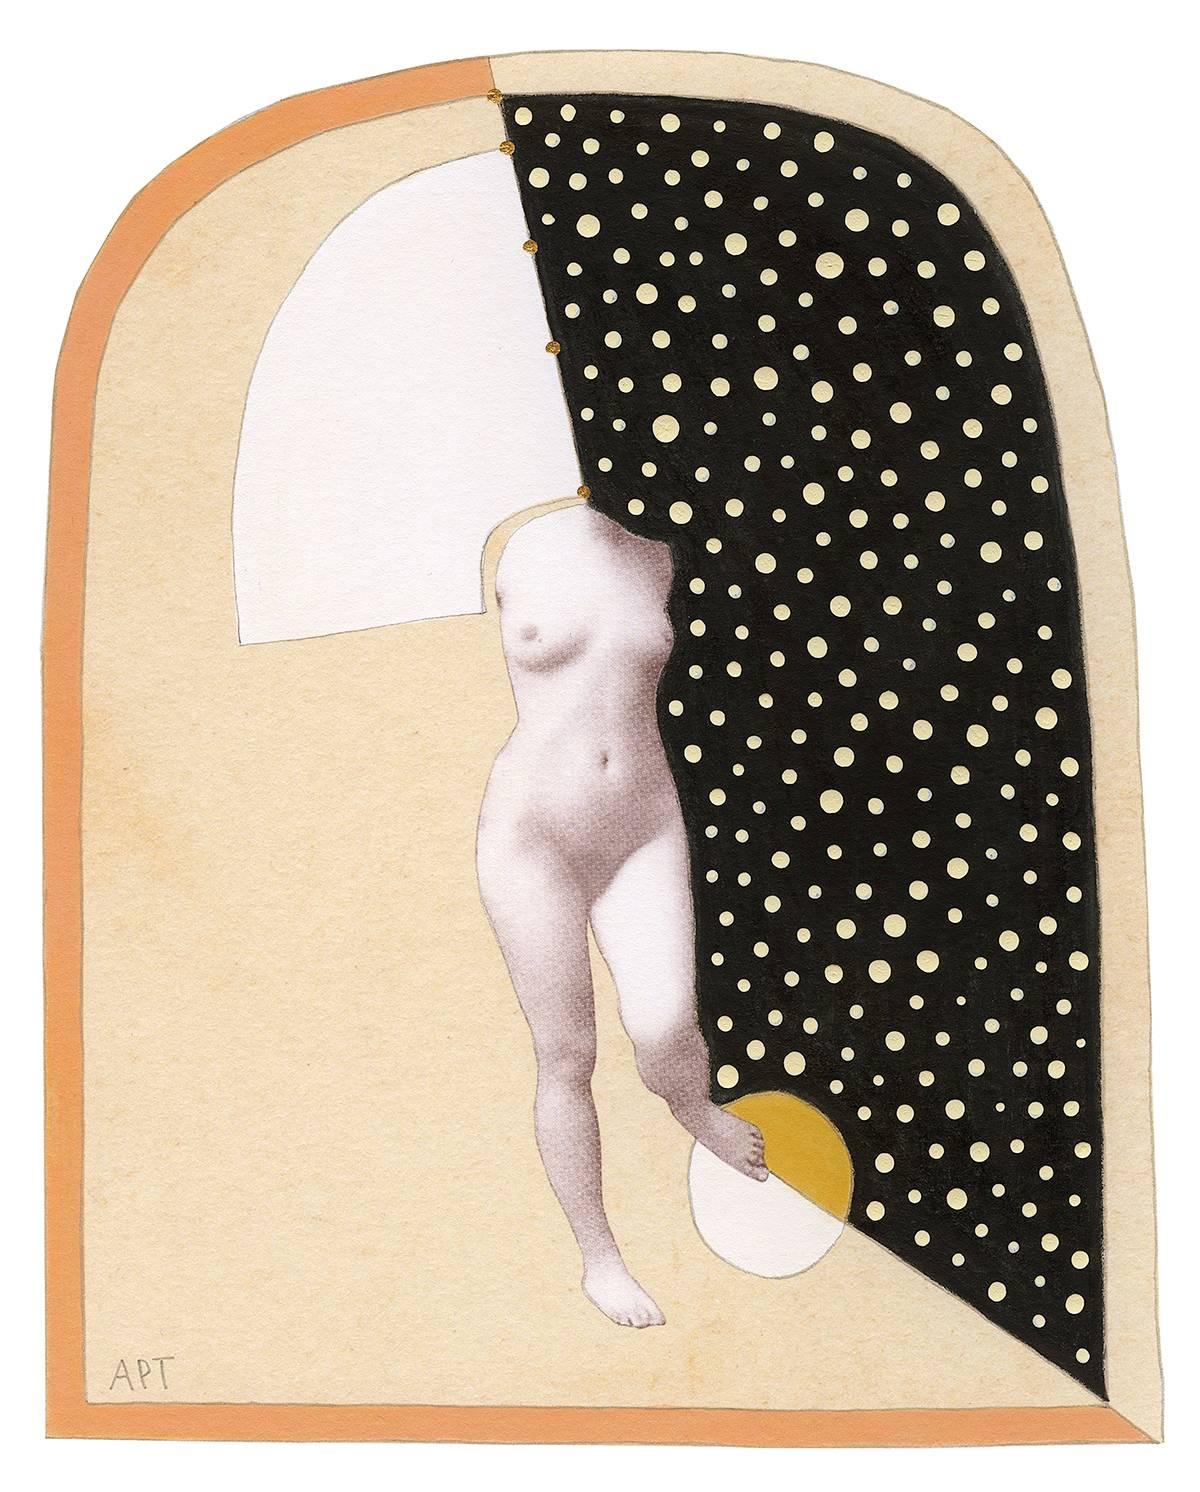 Athena Petra Tasiopoulos Nude Print - "Wing 1, " Framed Archival Pigment Print with Mixed-Media Hand Embellishments